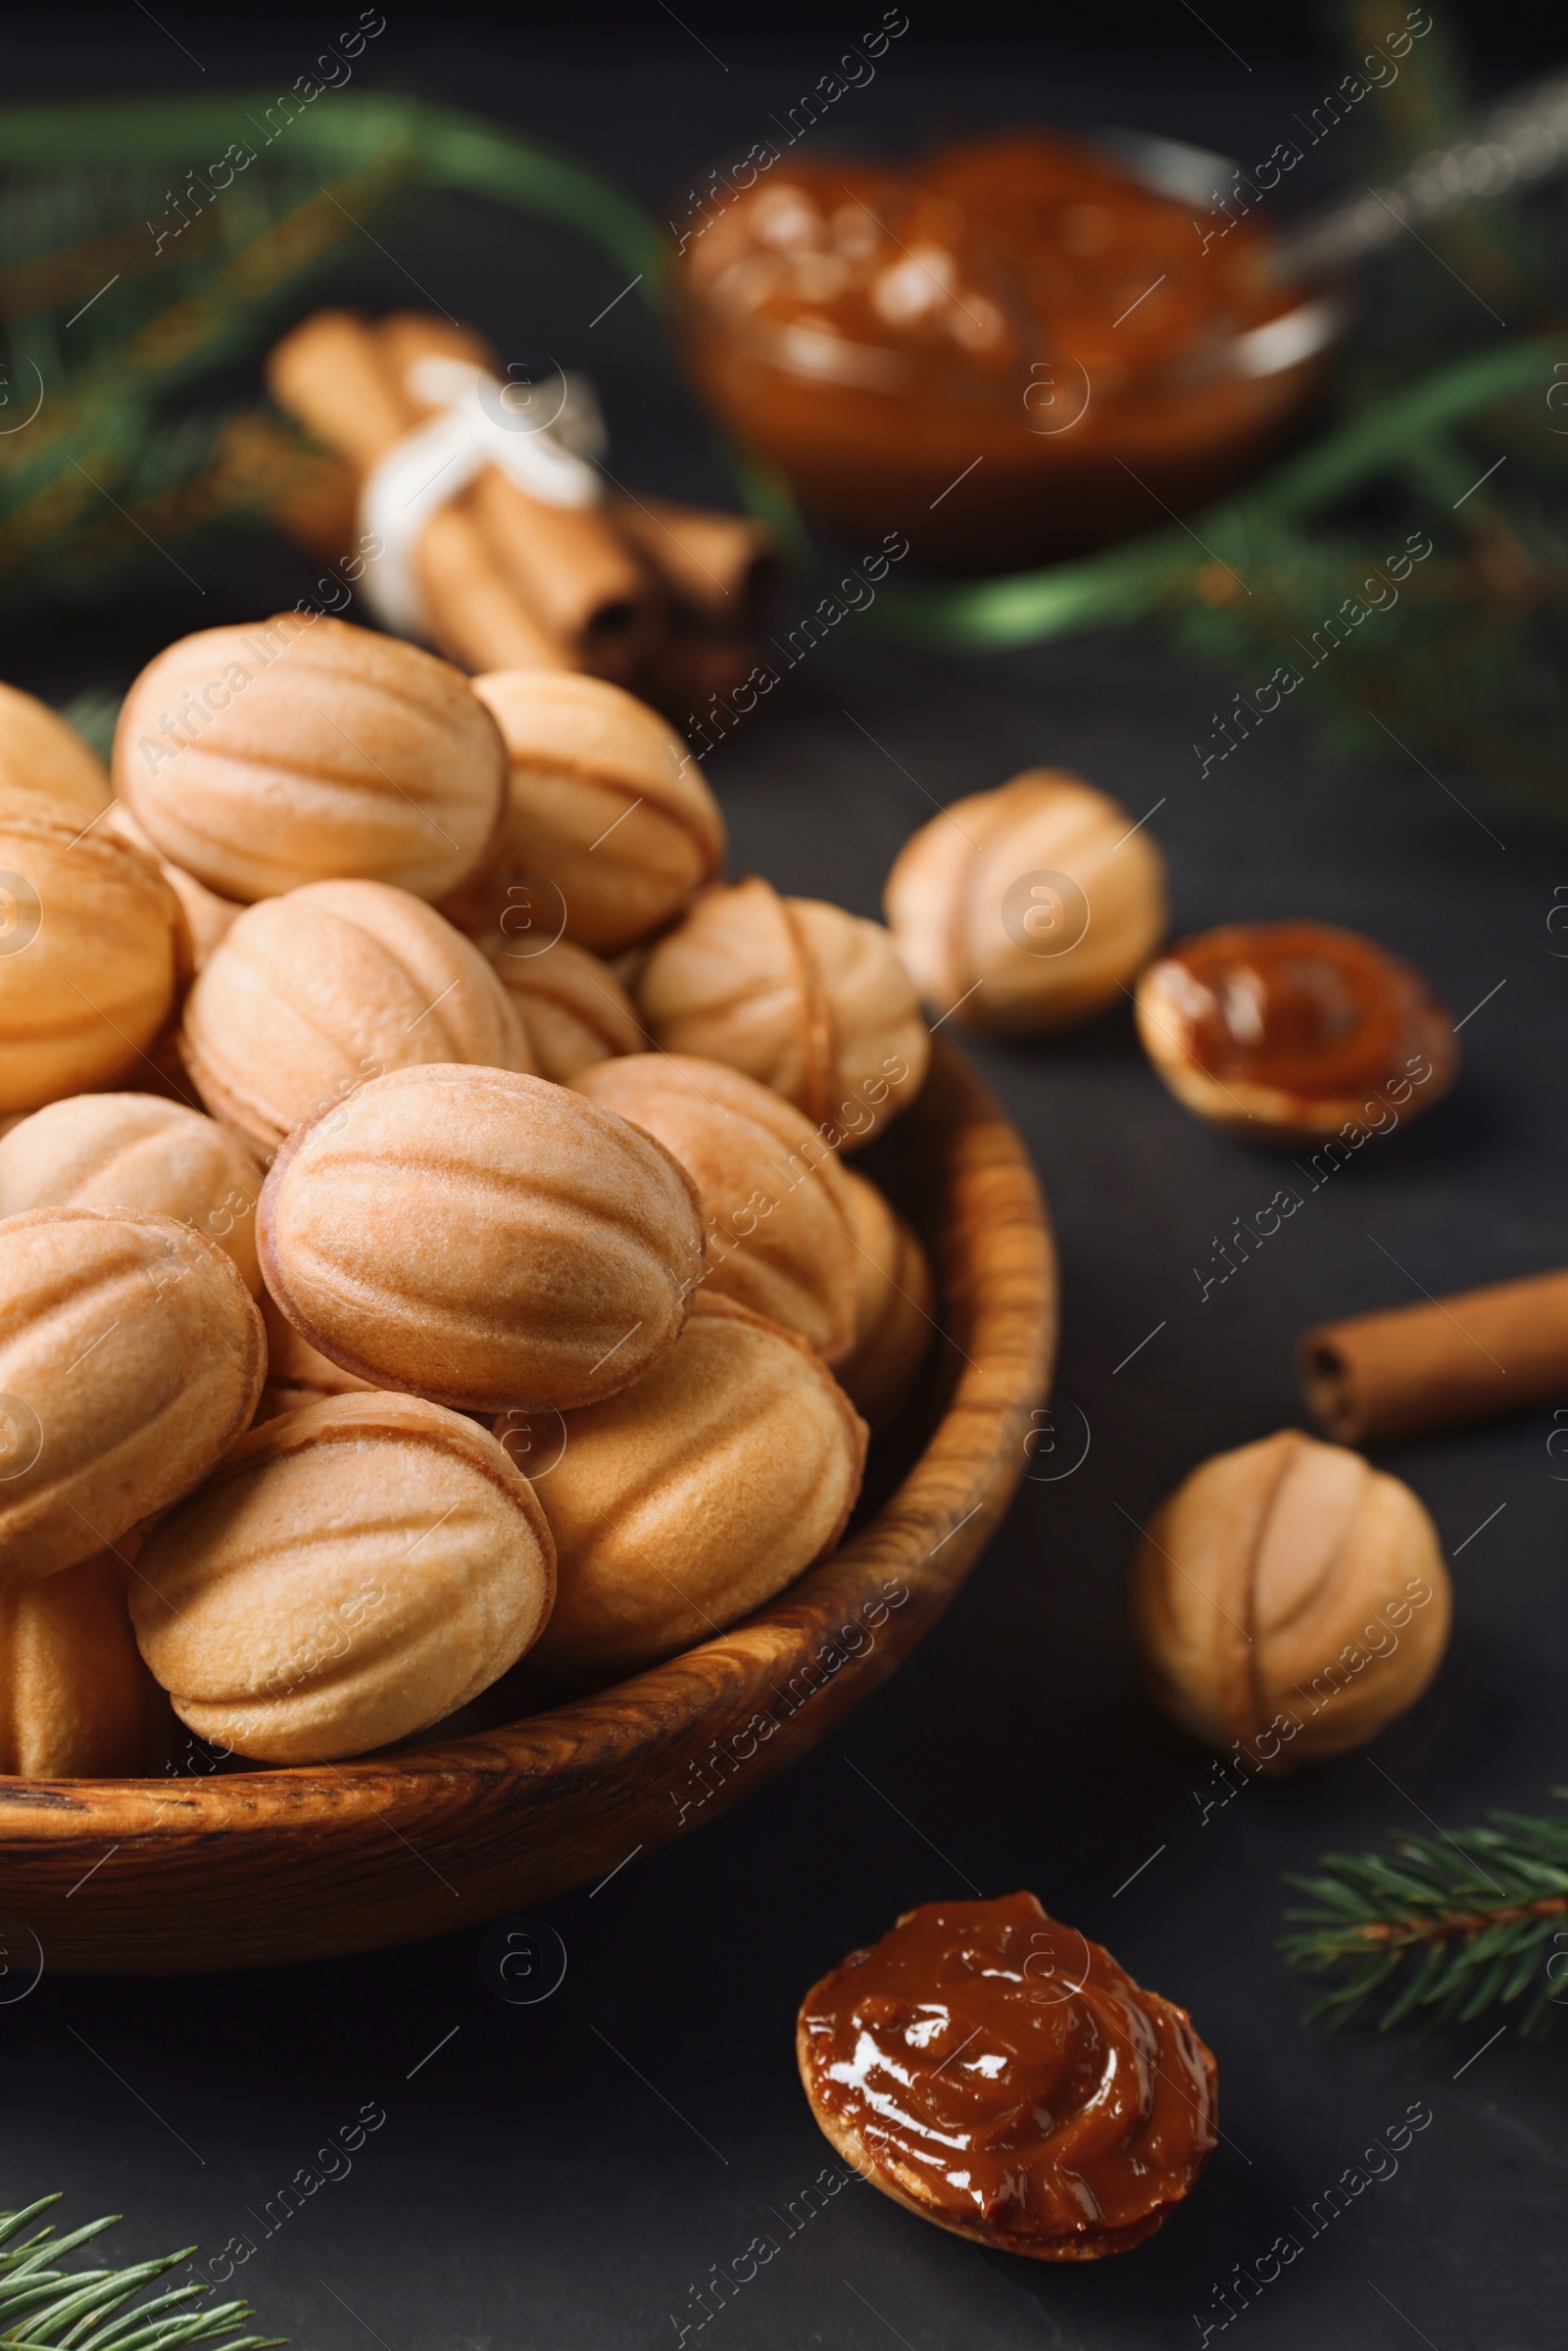 Photo of Homemade walnut shaped cookies with boiled condensed milk, cinnamon stick and fir branches on black table, closeup